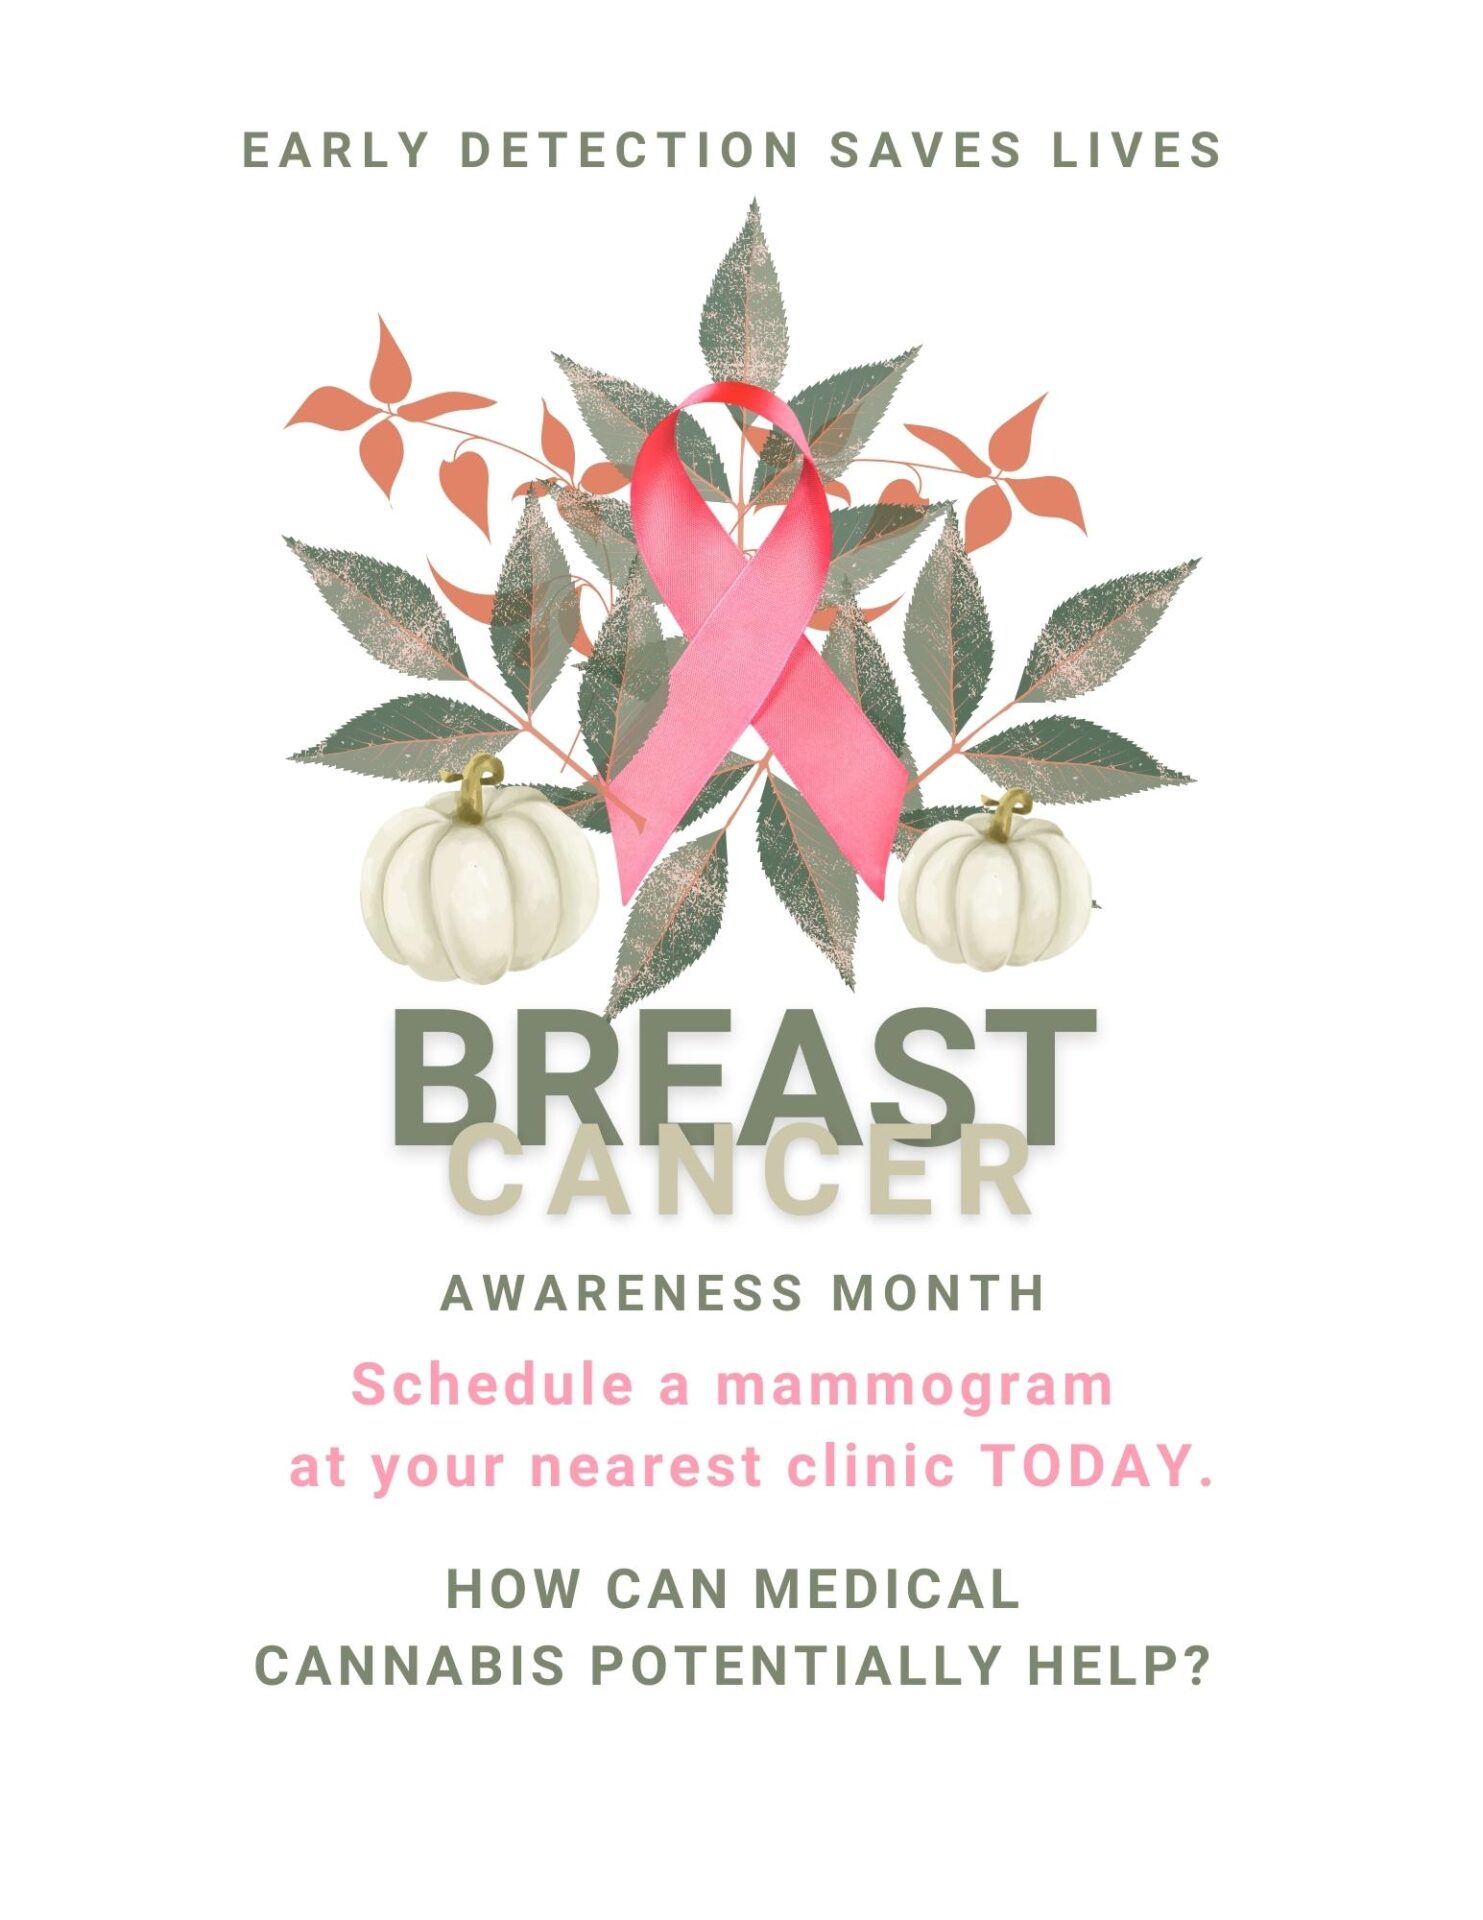 Can Medical Cannabis Help Breast Cancer Patients?